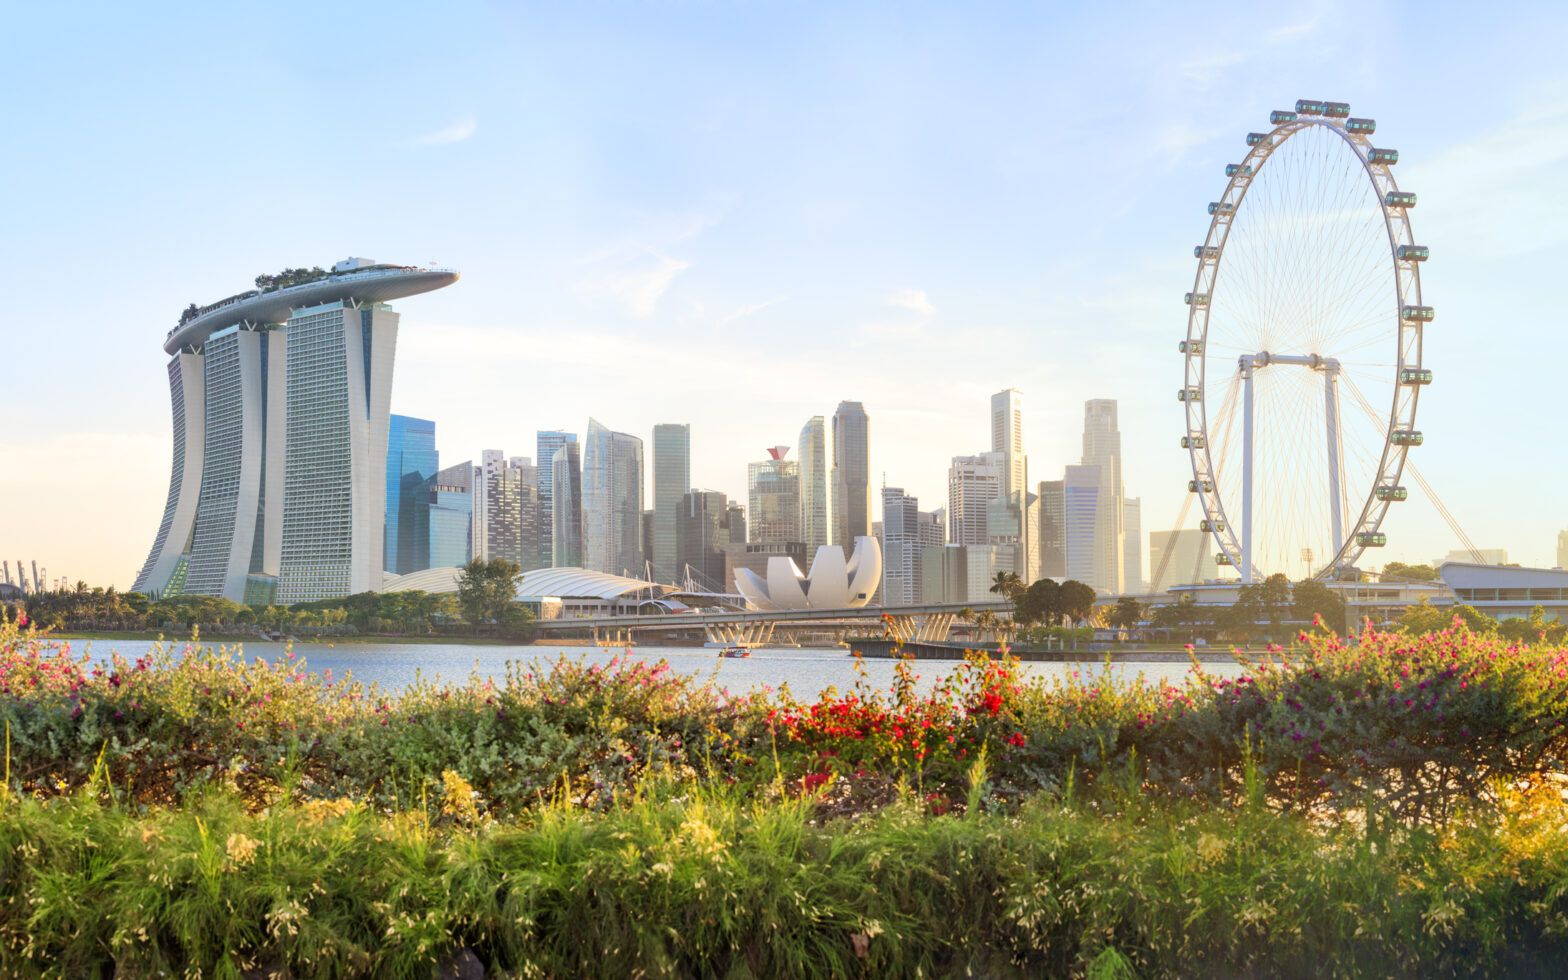 Singapore investors’ mismatch between ESG values and action